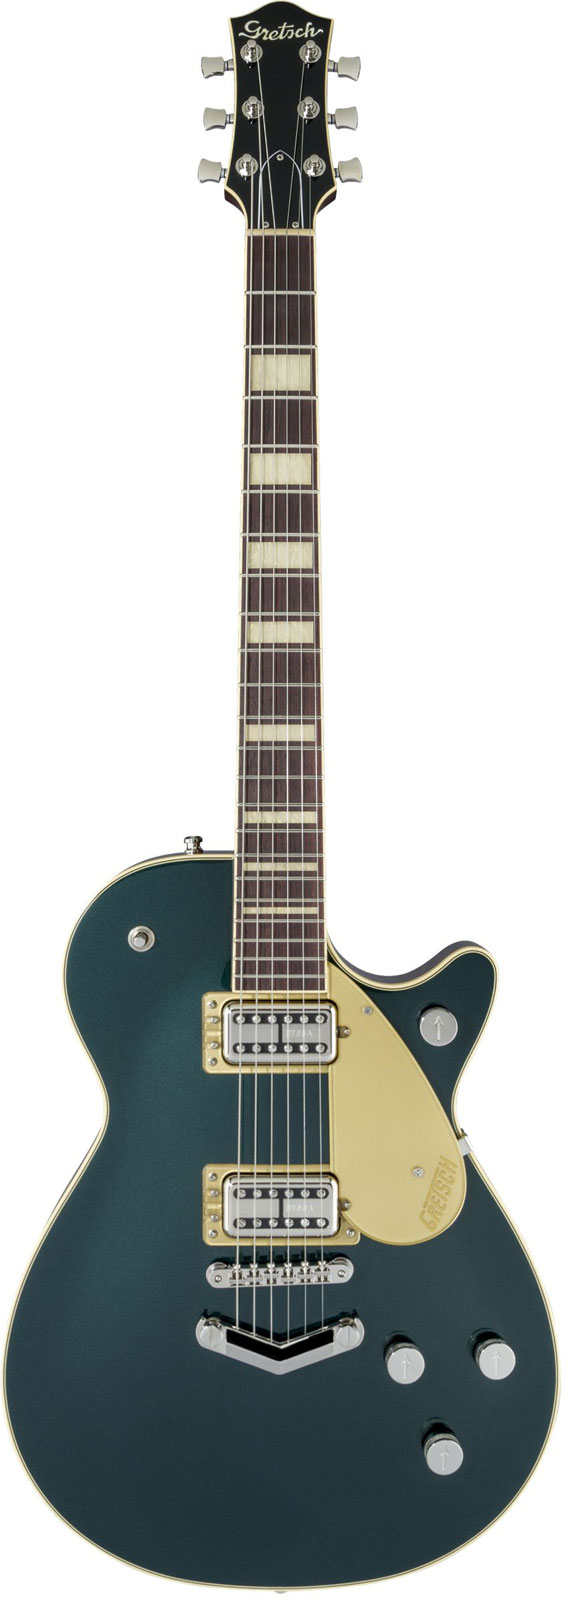 GRETSCH GUITARS G6228 PLAYERS EDITION JET BT WITH V-STOPTAIL RW, CADILLAC GREEN